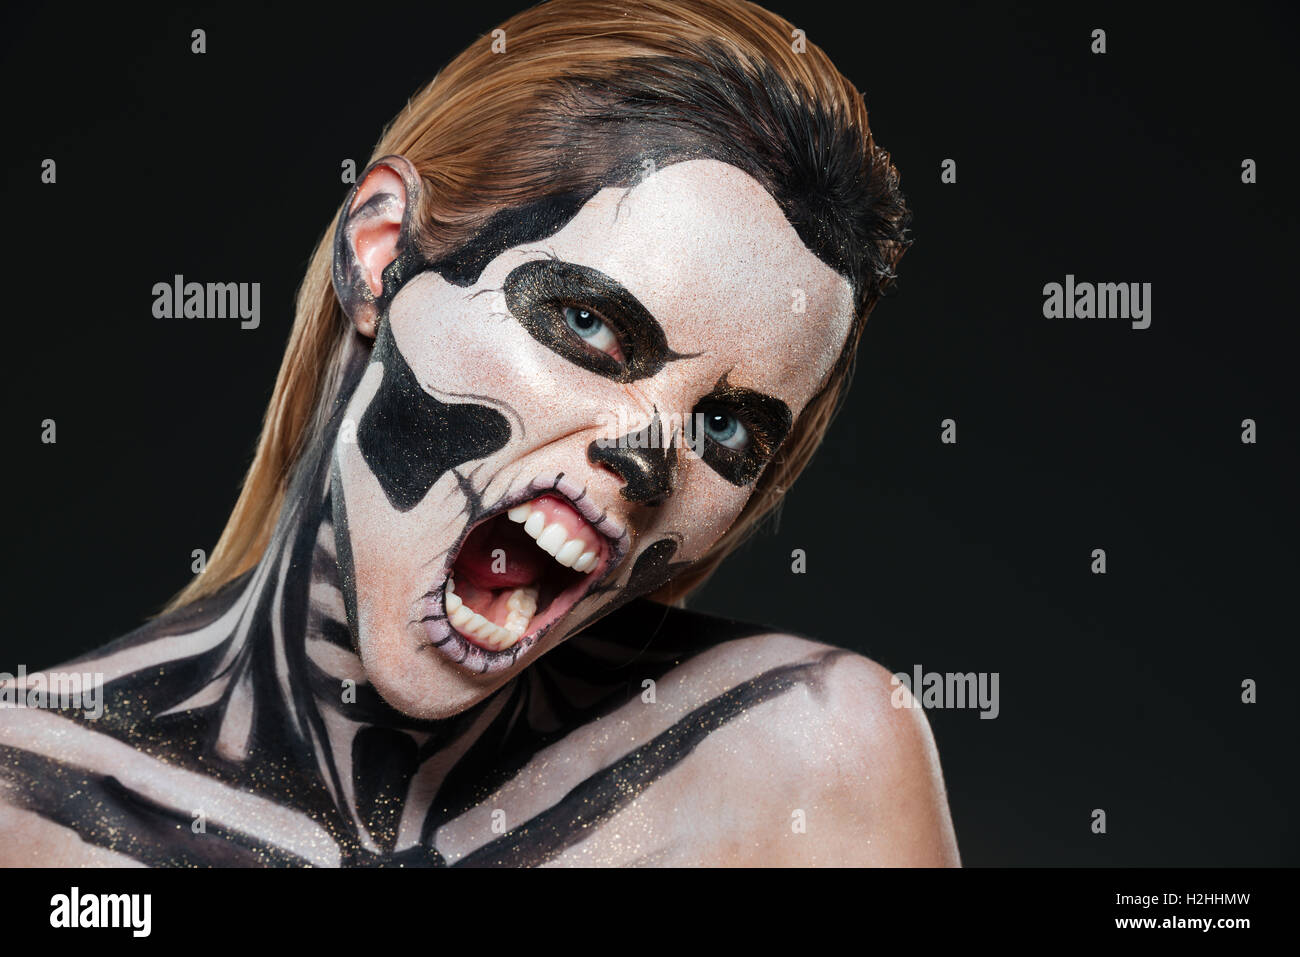 Woman with frightened halloween makeup and opened mouth shouting over black bakground Stock Photo